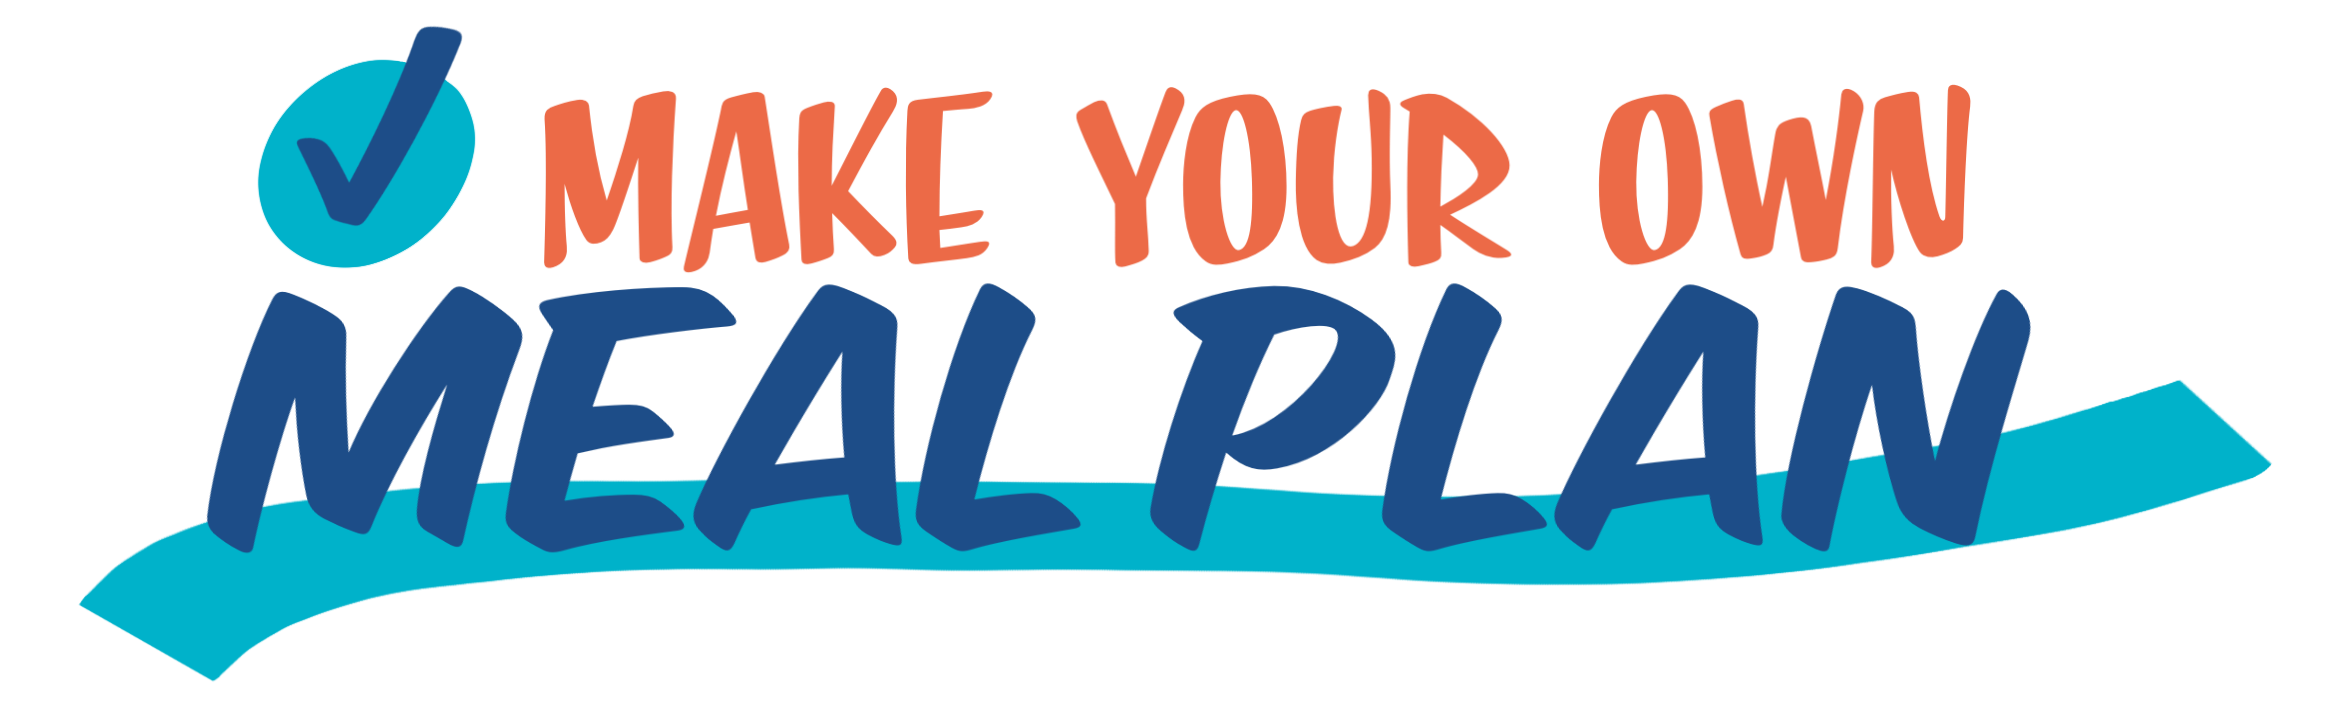 Make Your Own Meal Plan System logo